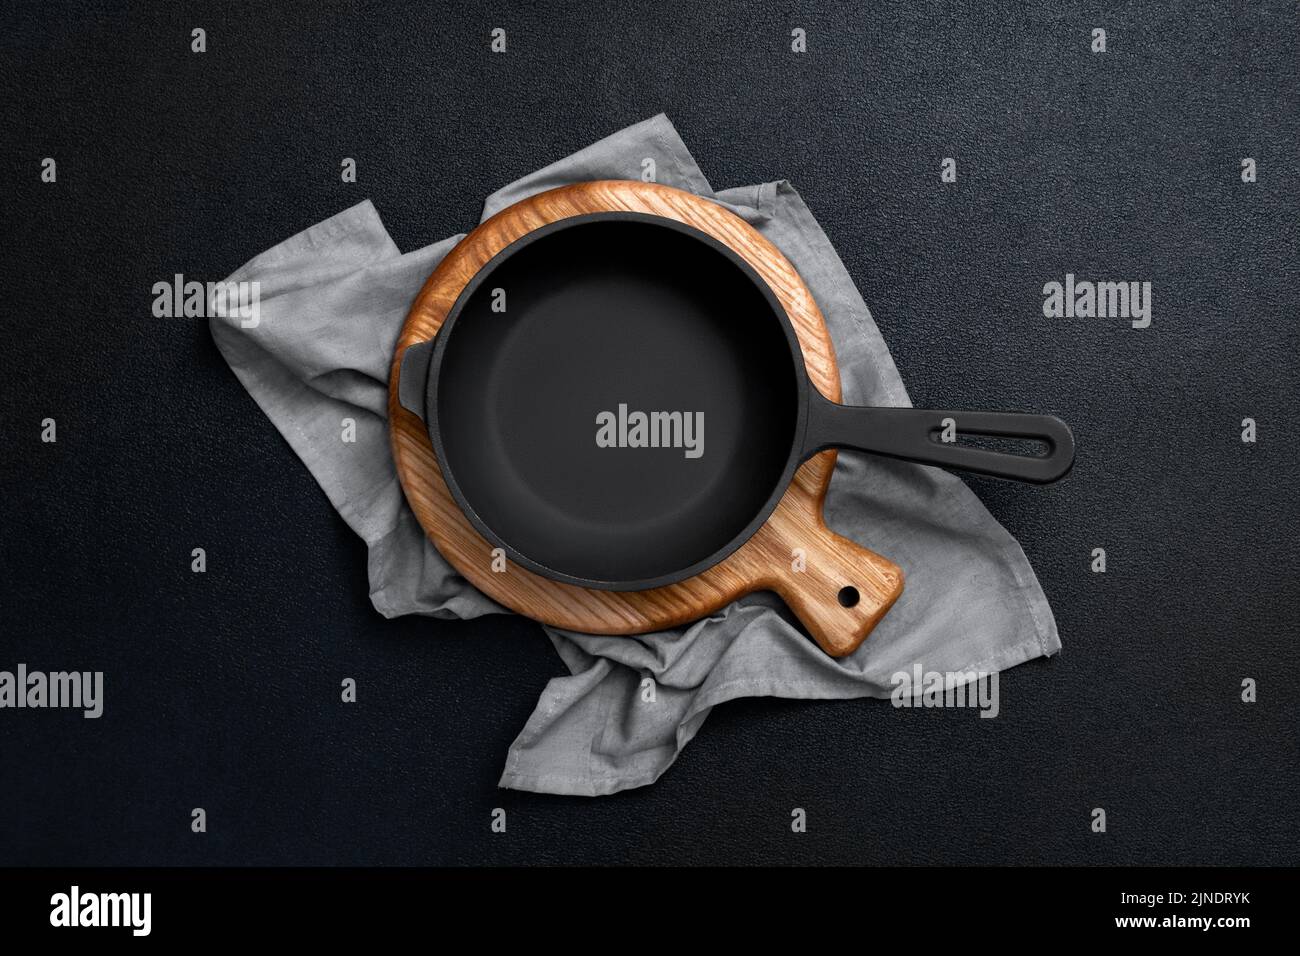 Cast iron skillet on a wooden board. Frying pan, cutting board and kitchen towel on a black background. Kitchen utensils. Empty place. Top view. Stock Photo